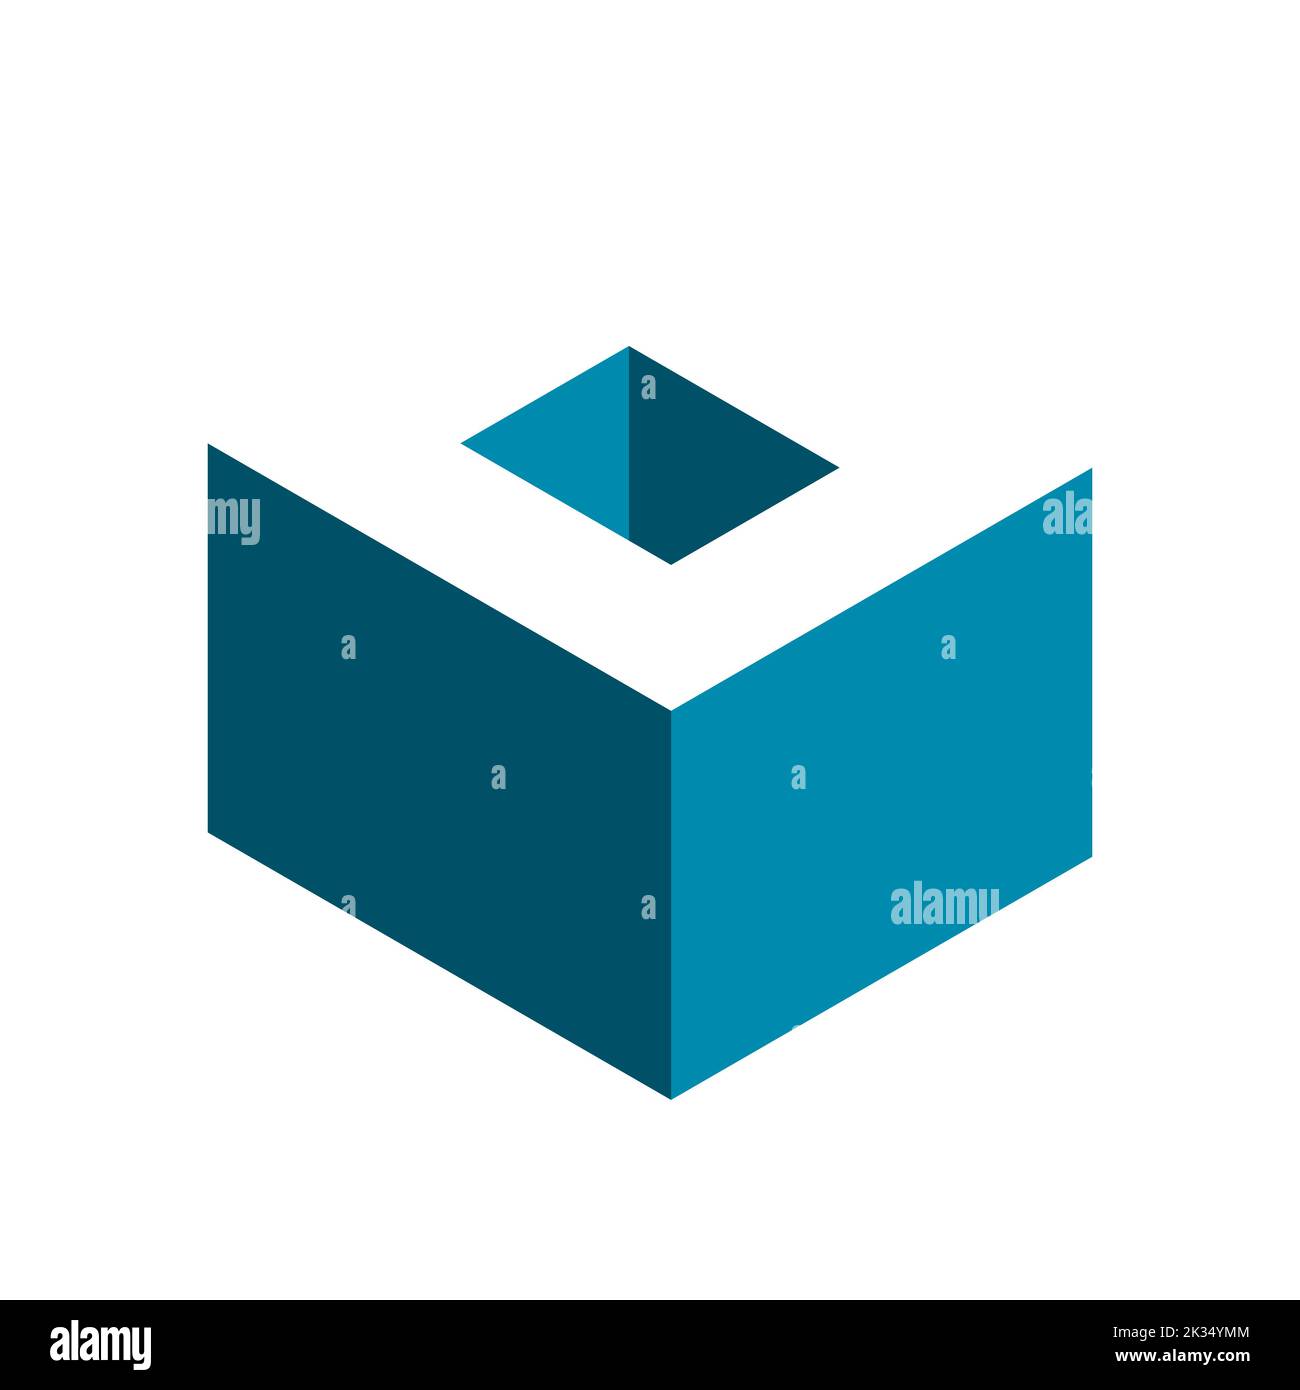 Letter O cube logo. 3D isometric block shape with long shadow effect. Blue box with white letter O on top. Construction industry symbol. Vector Stock Vector